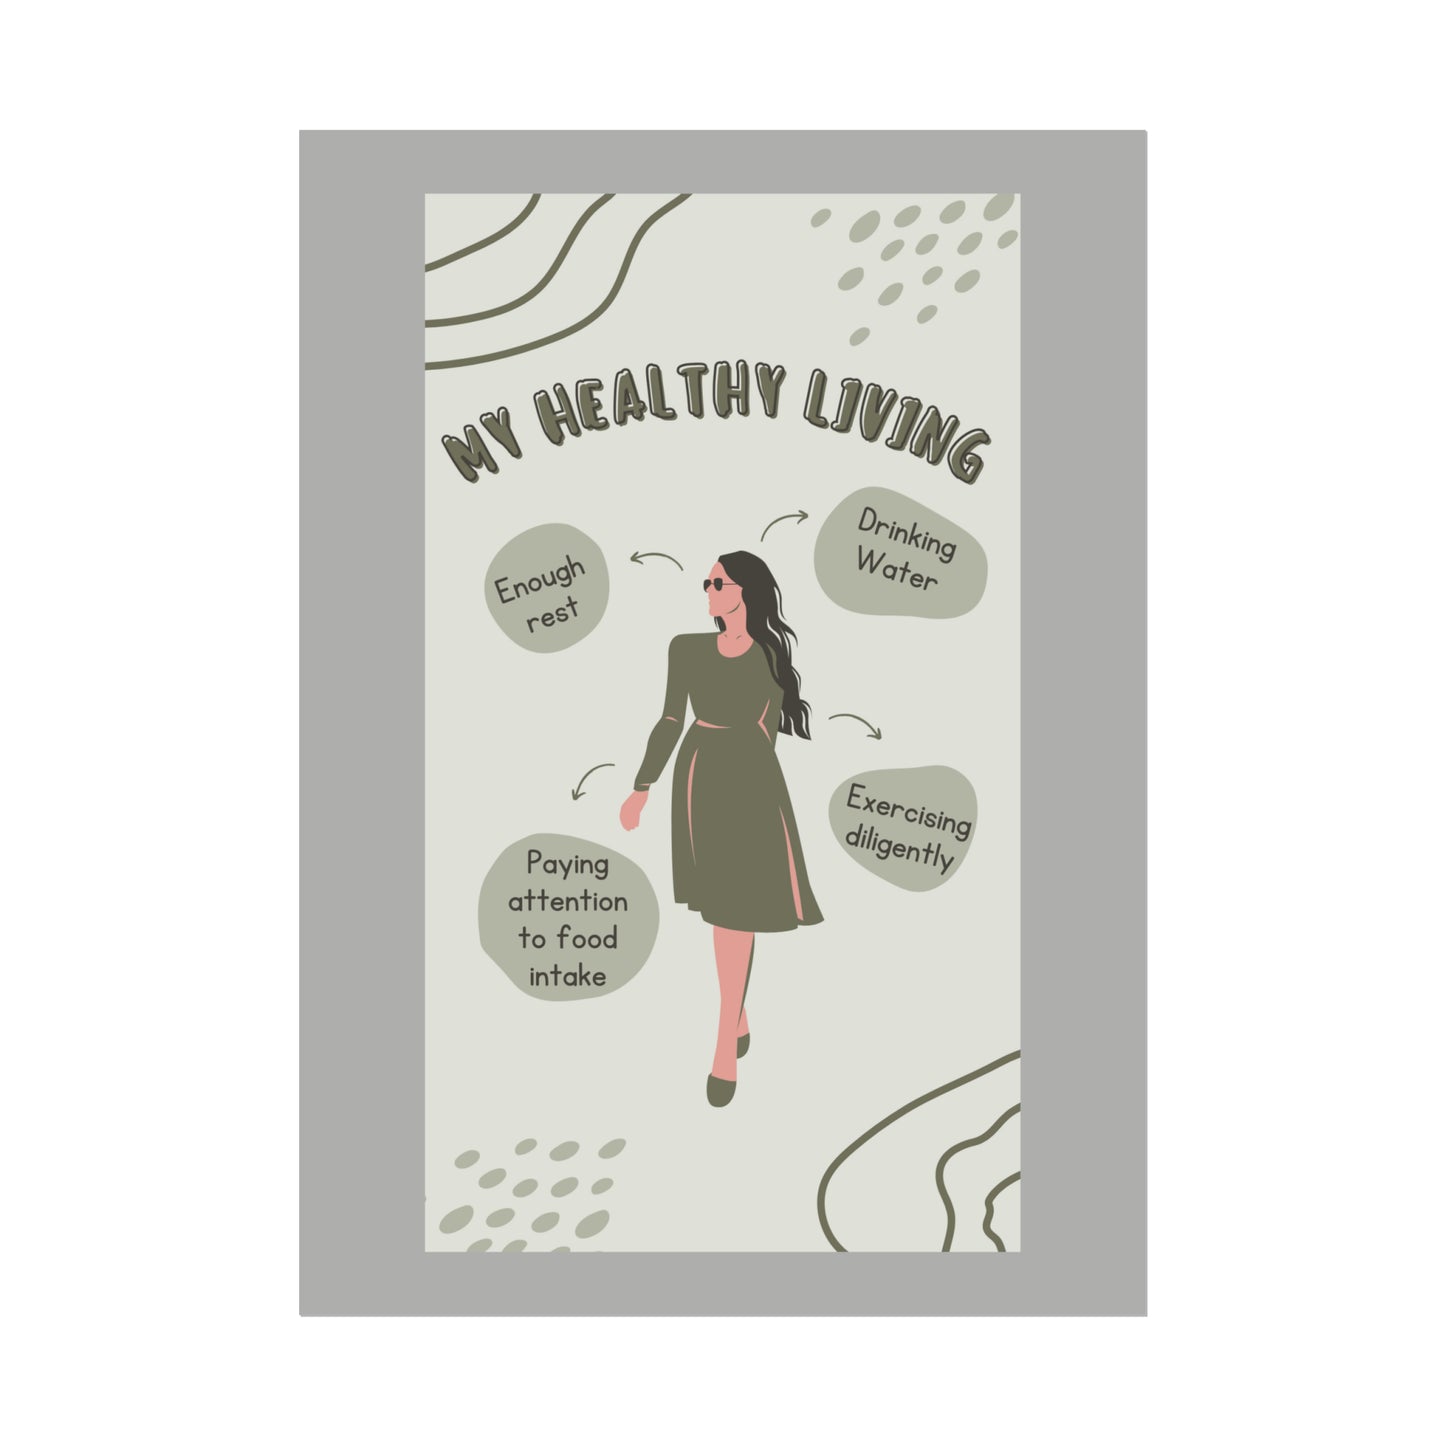 PoM's Self Motivation series ... My Healthy Living (affirmation) - Rolled Poster (180, 200 or 285 gsm paper options)